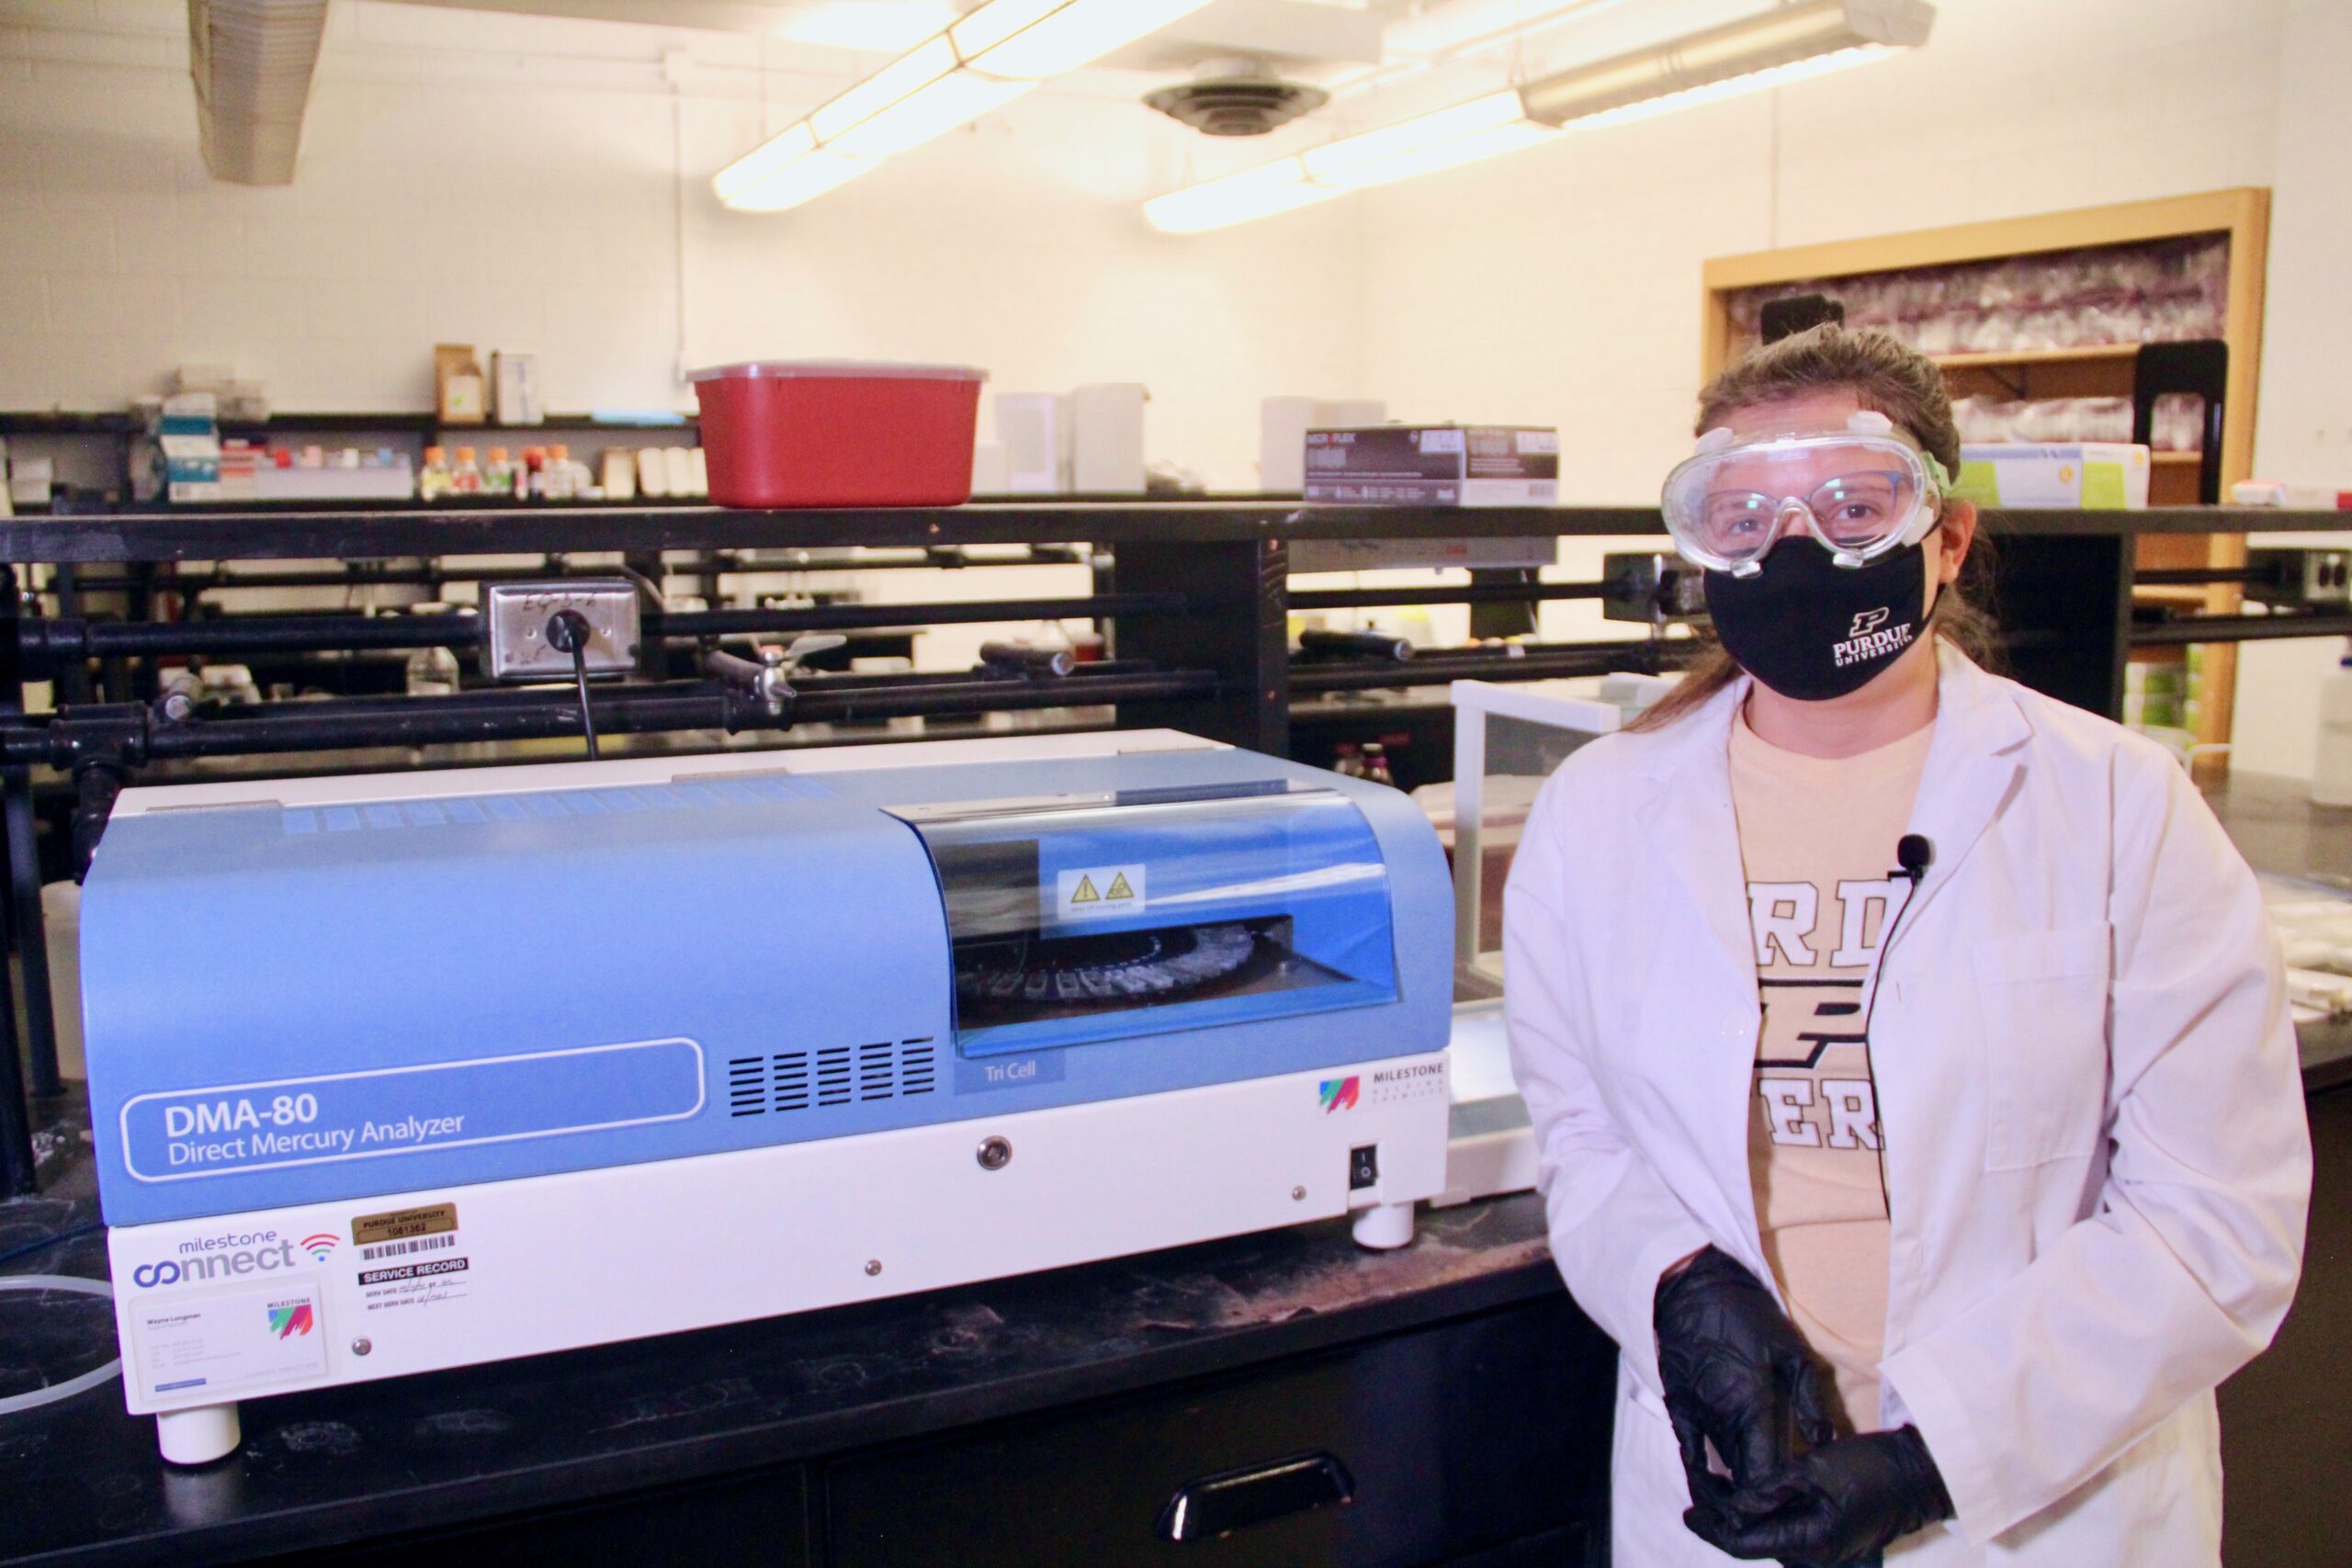 Kiara Smith poses in front of a mercury analyzer machine in a lab.